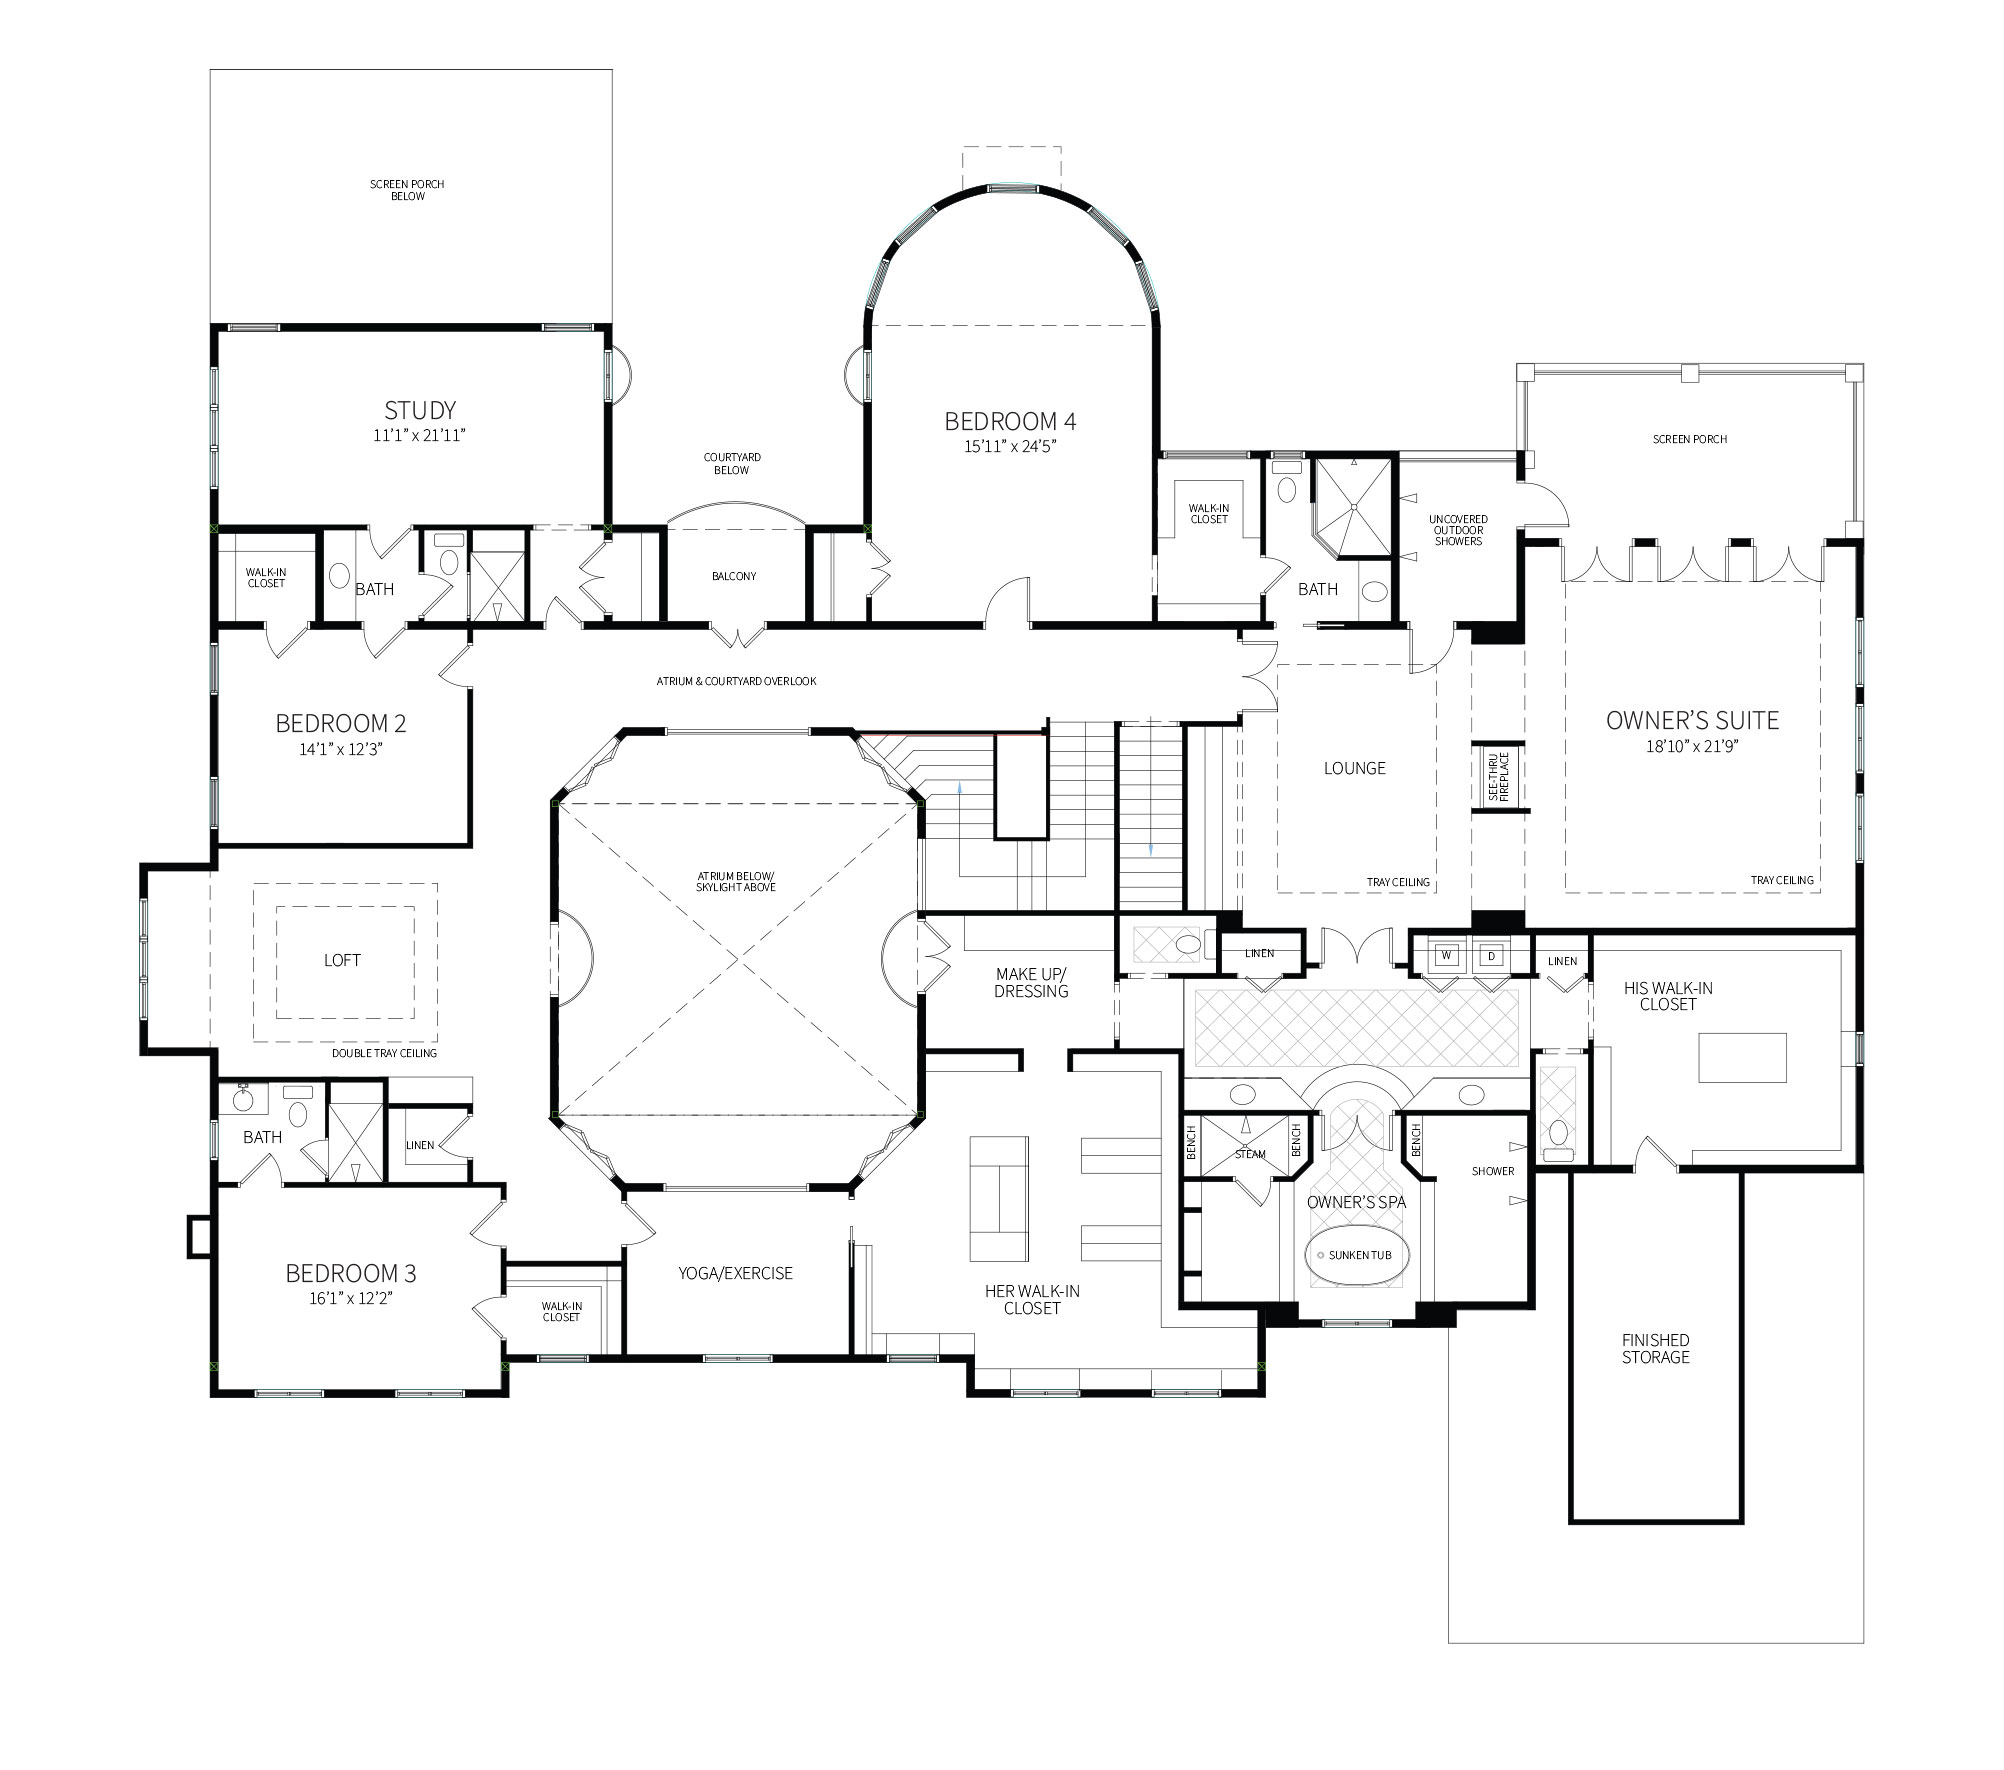 Second floor plan of the Old World showcase home, with large owners suite, and overlooks and balconies looking into the atrium.